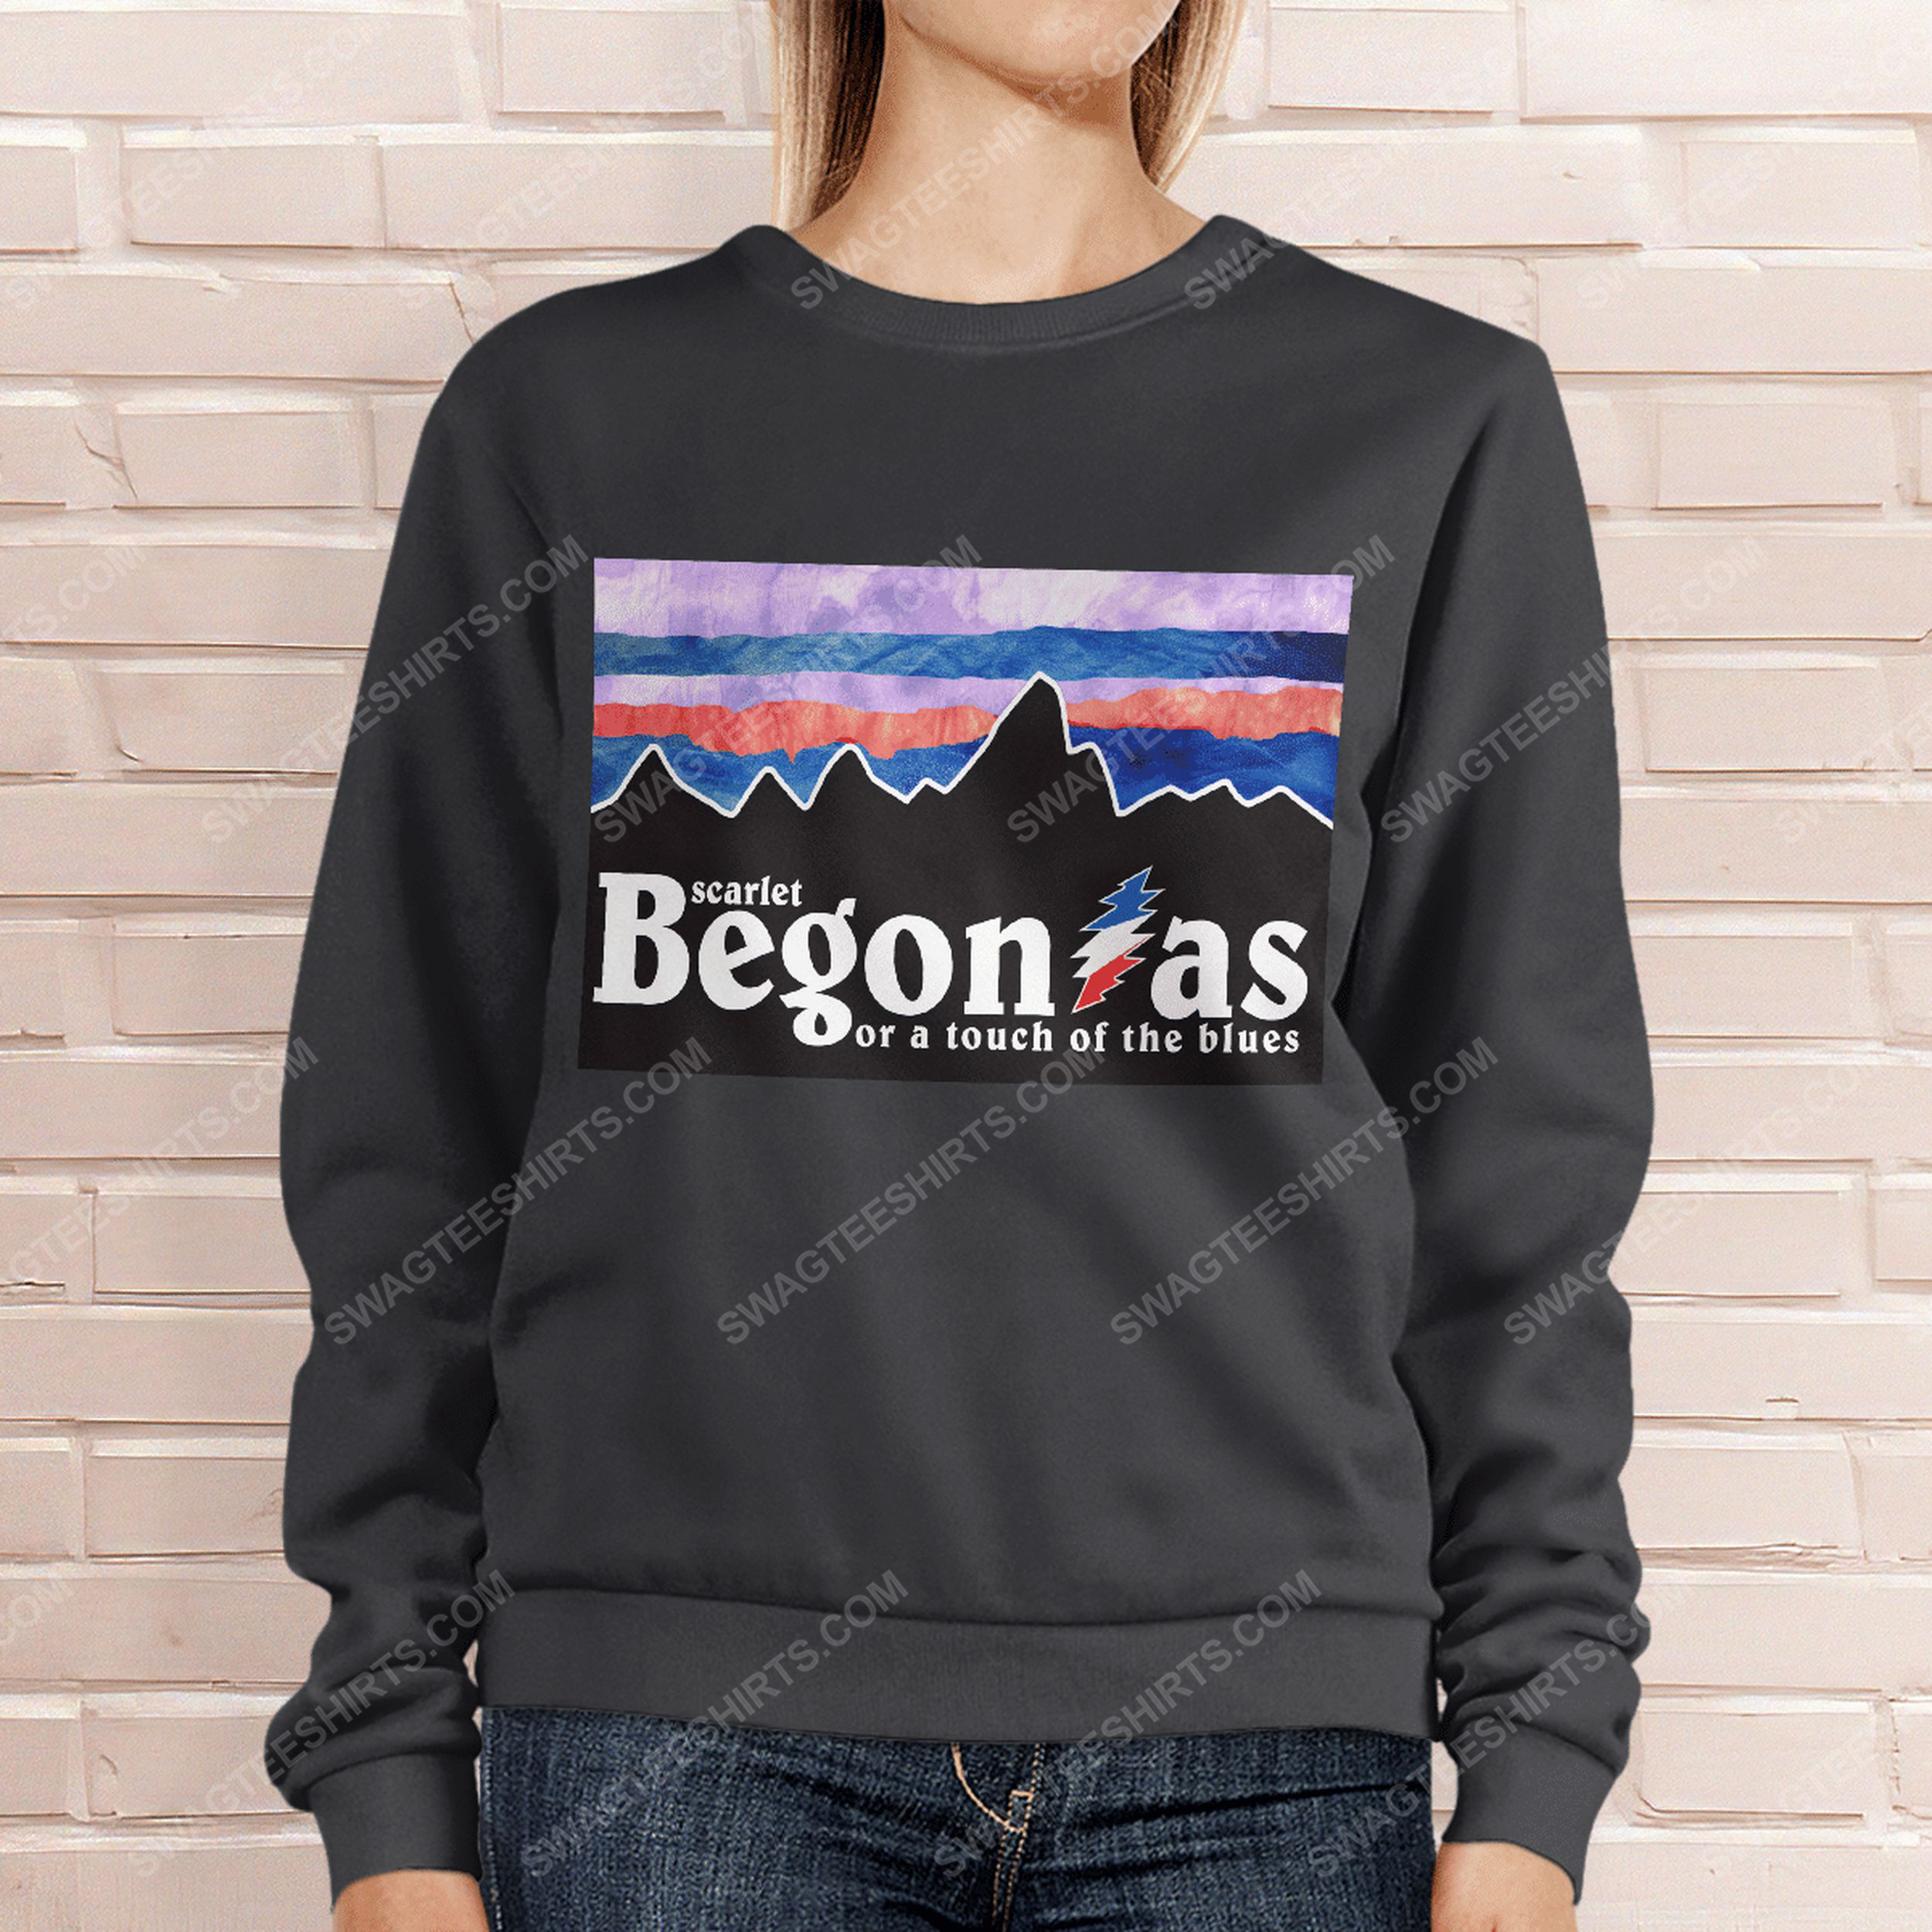 Scarlet begonias or a touch of the blues grateful dead sweatshirt 1(1)